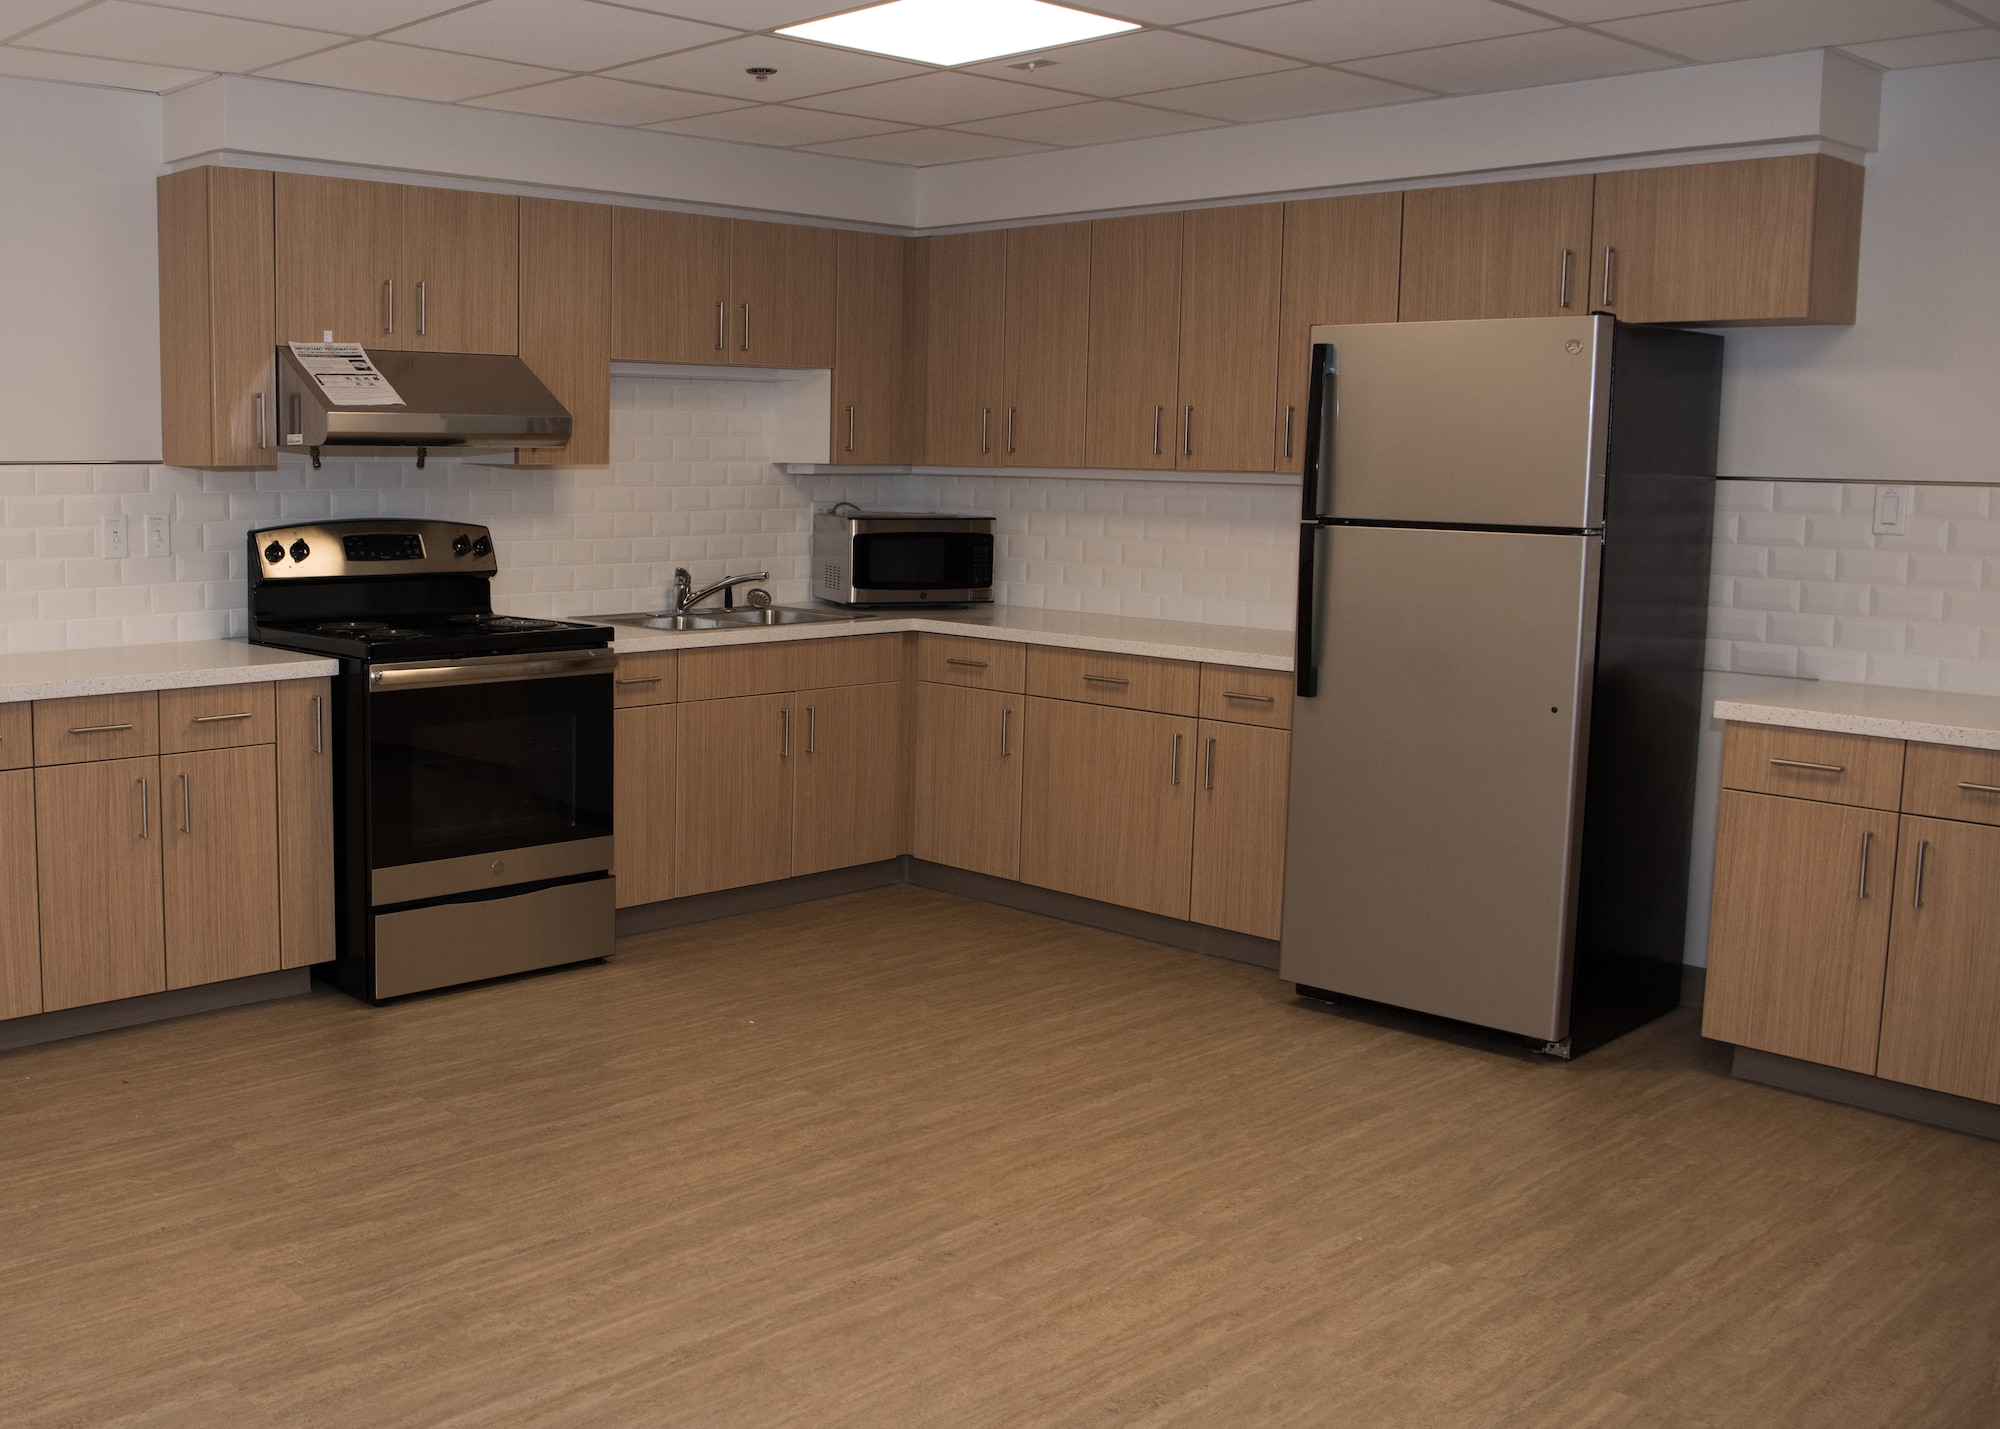 The second floor common area in Endeavour Hall contains a secondary kitchen.